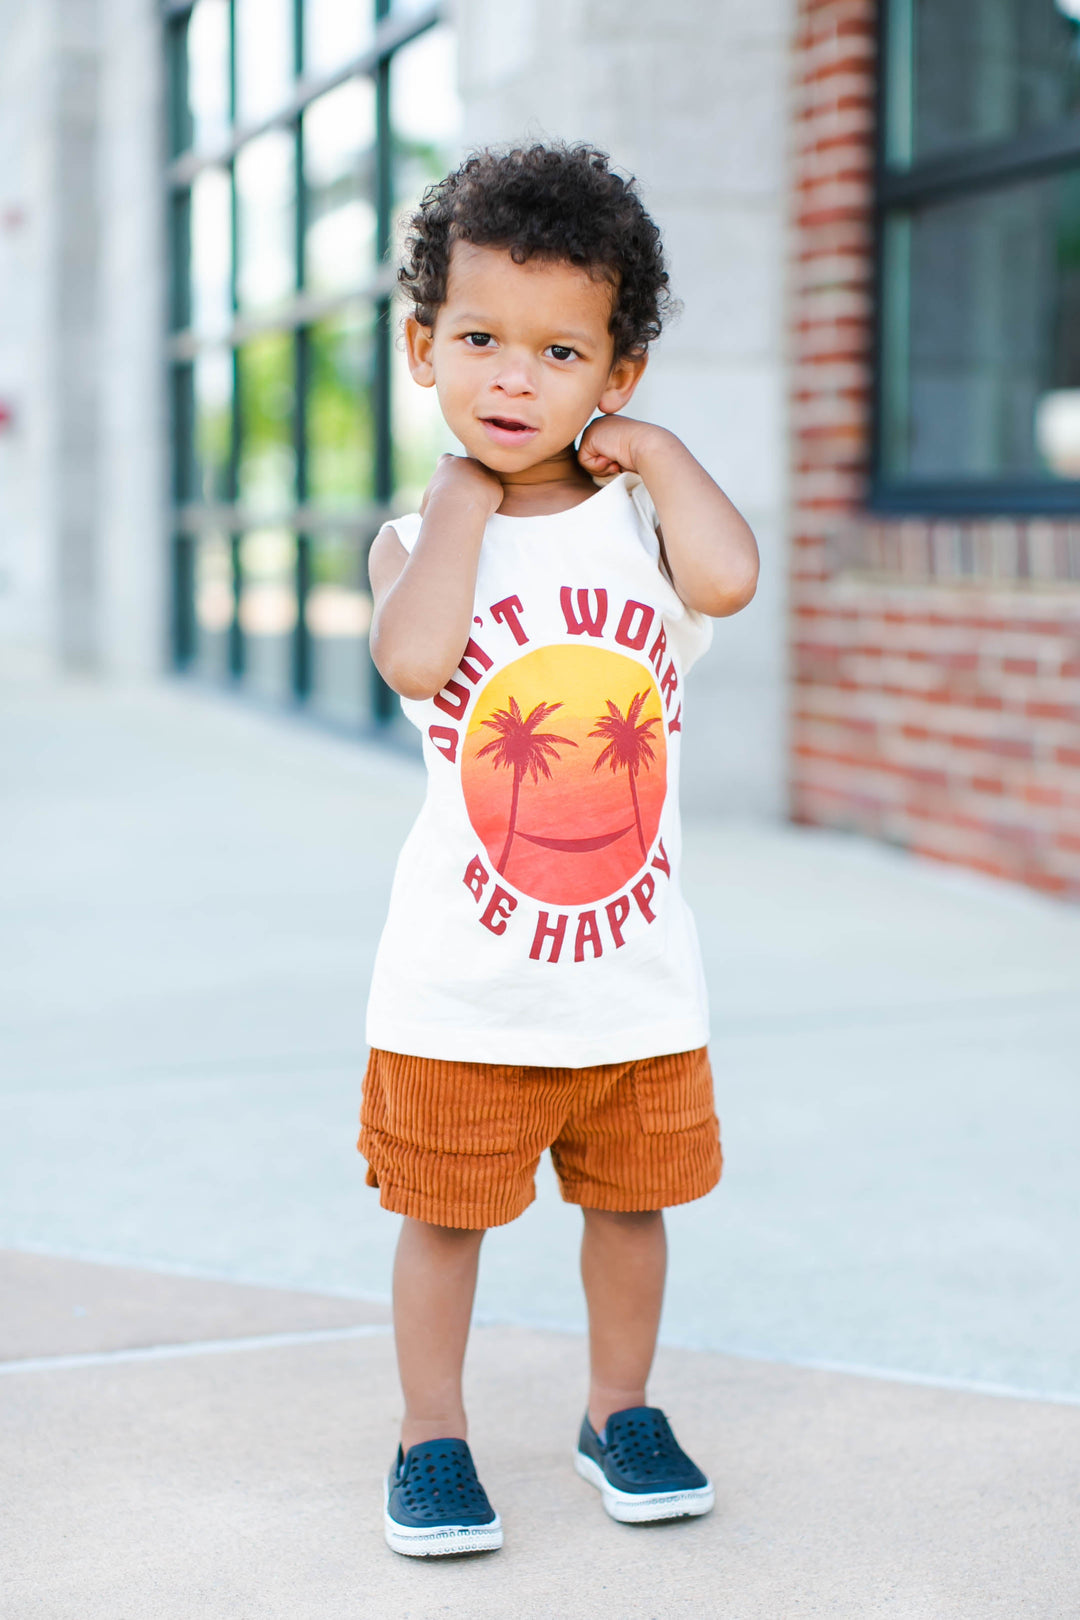 Don't worry be happy childrens tank top